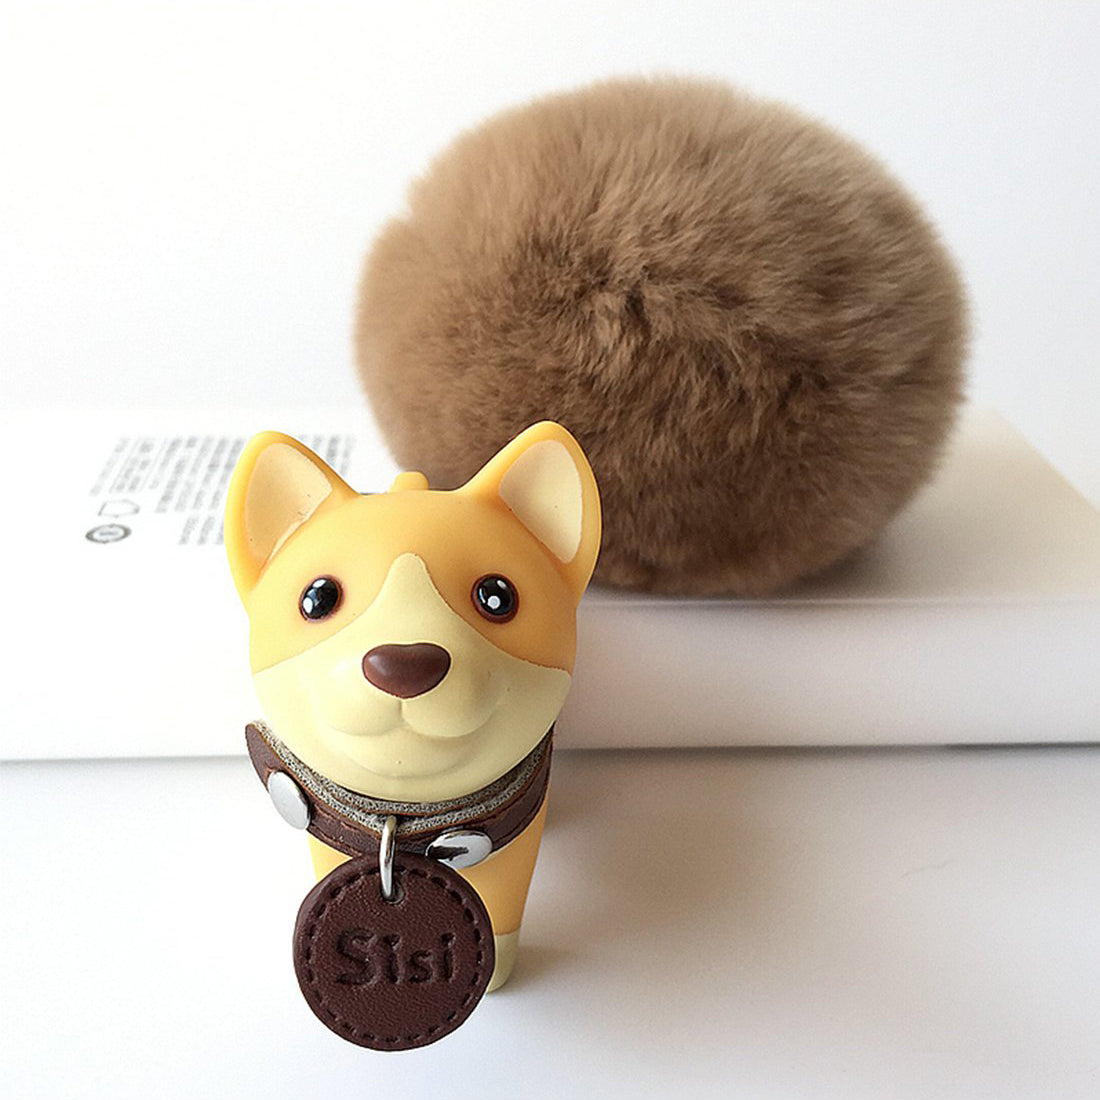 Louis Vuitton LV Shiba Key Holder and Bag Charm Beige Leather